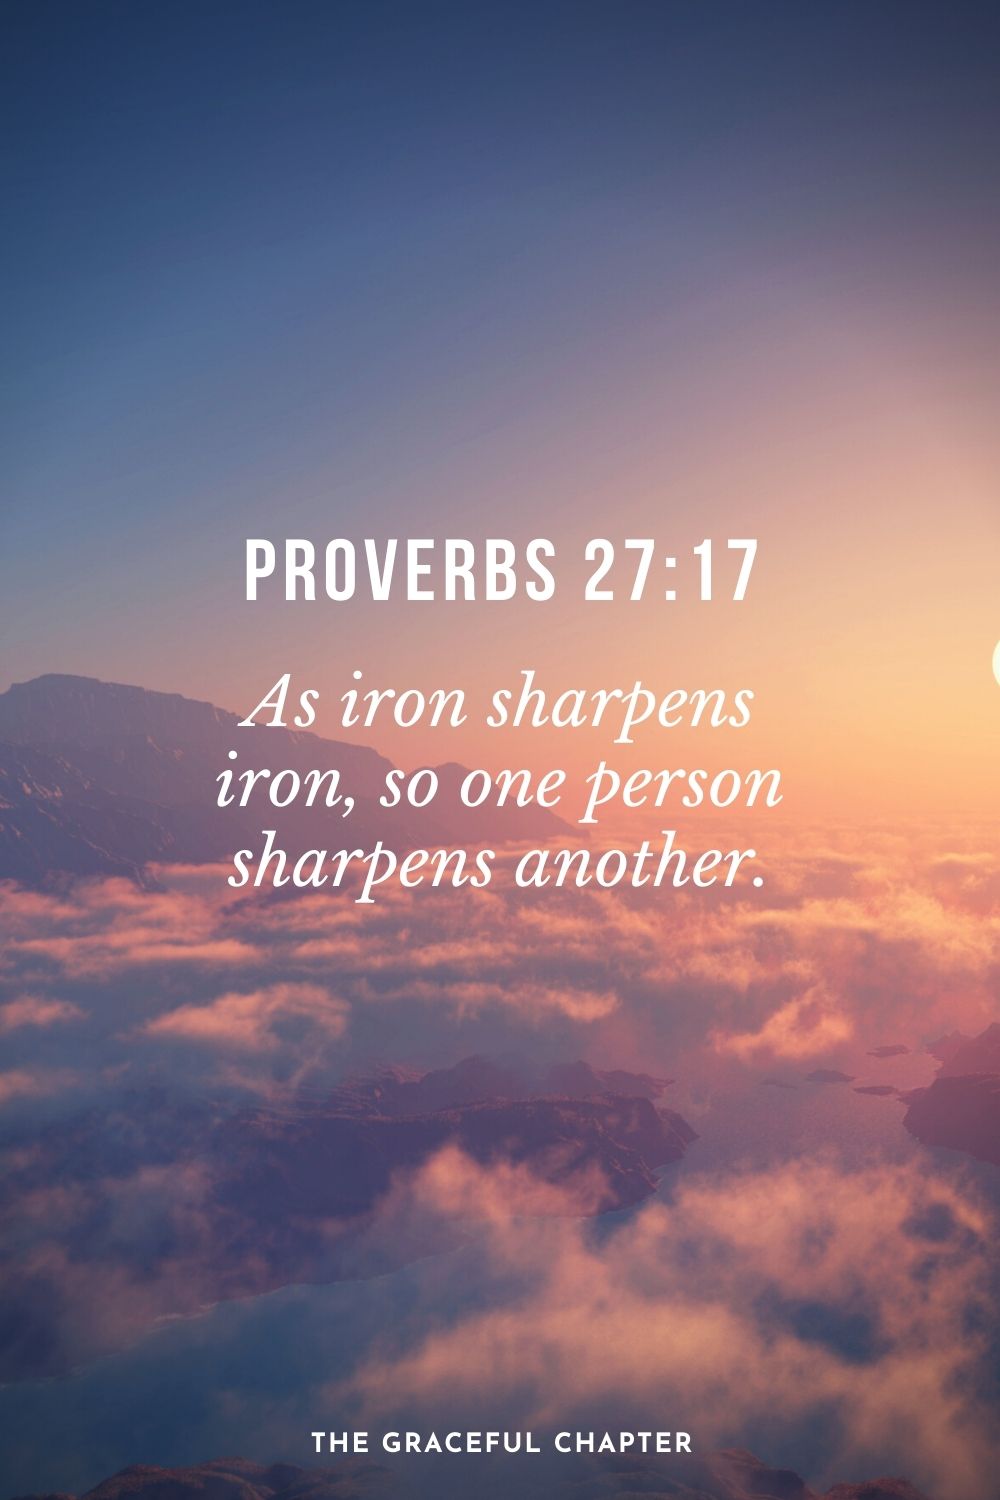 As iron sharpens iron, so one person sharpens another. Proverbs 27:17